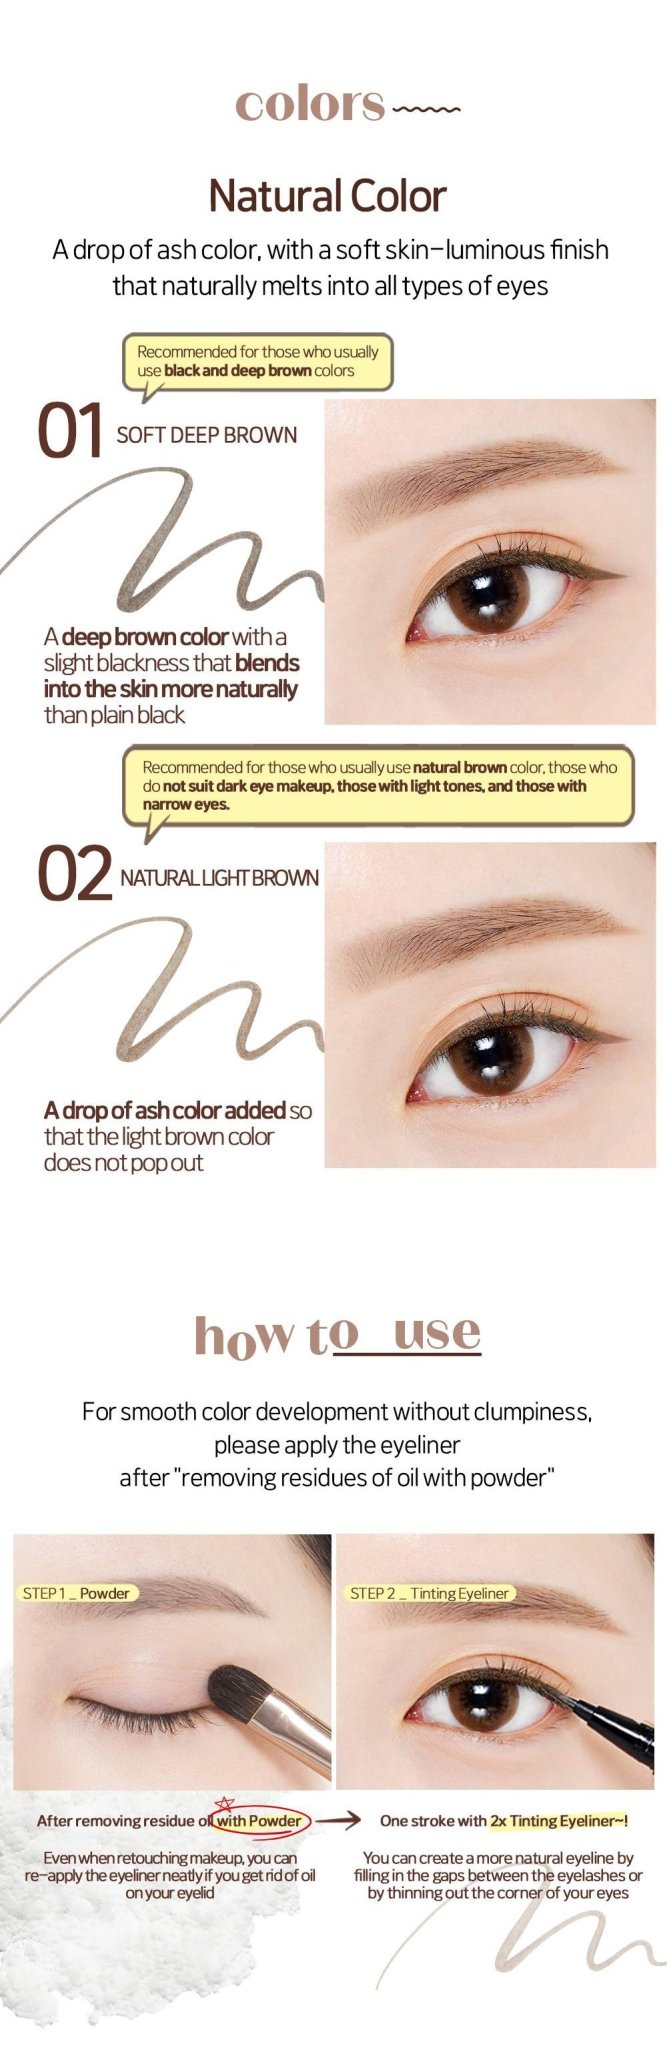 ETUDE HOUSE 2X Tinting Eyeliner - 2 Color to Choose